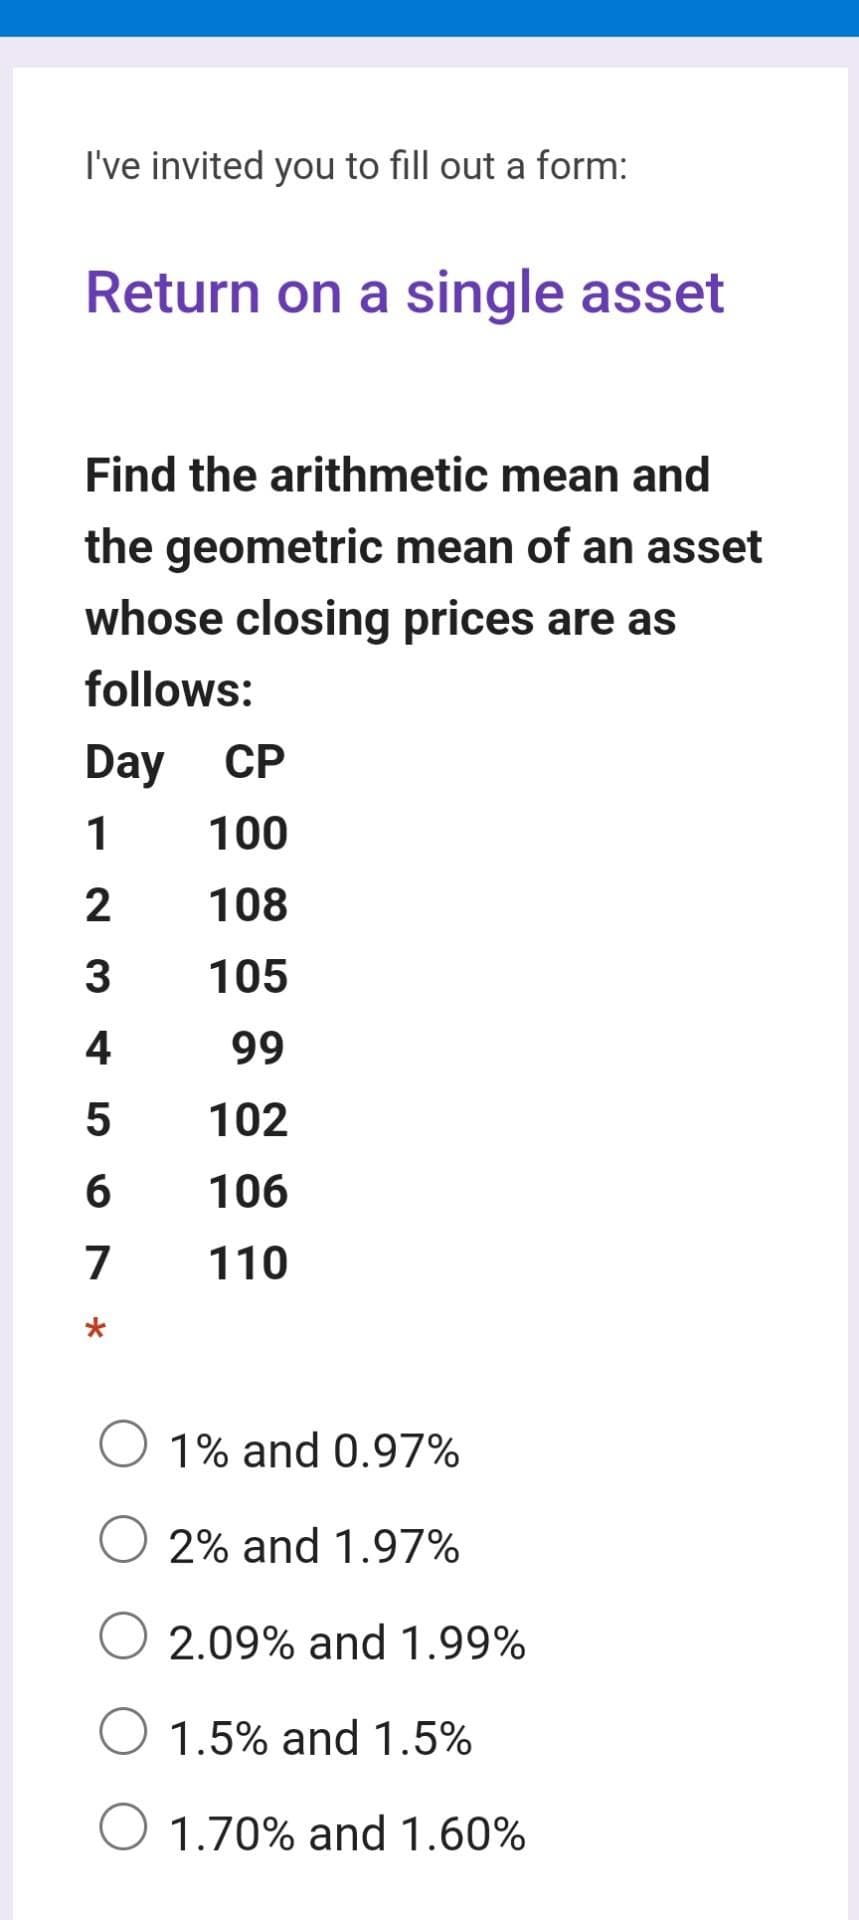 I've invited you to fill out a form:
Return on a single asset
Find the arithmetic mean and
the geometric mean of an asset
whose closing prices are as
follows:
Day CP
1
100
2
108
3
105
4
99
5
102
6
106
7
110
*
1% and 0.97%
2% and 1.97%
2.09% and 1.99%
1.5% and 1.5%
1.70% and 1.60%